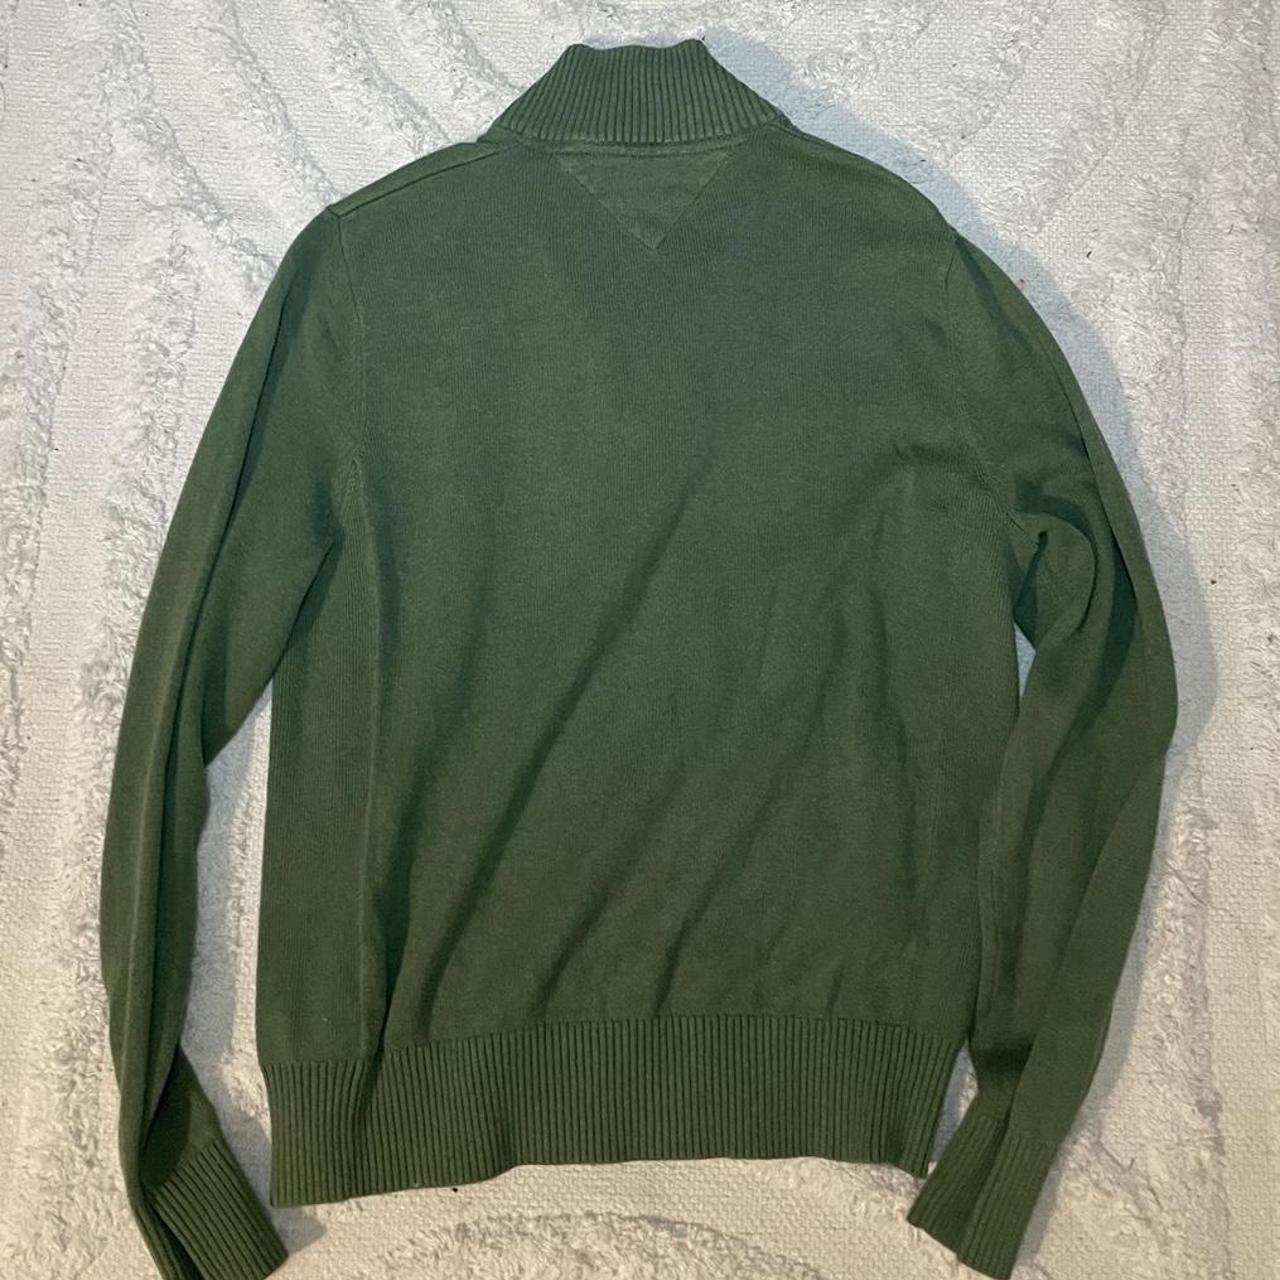 Tommy hilfiger green sweater size small shipping... - Depop